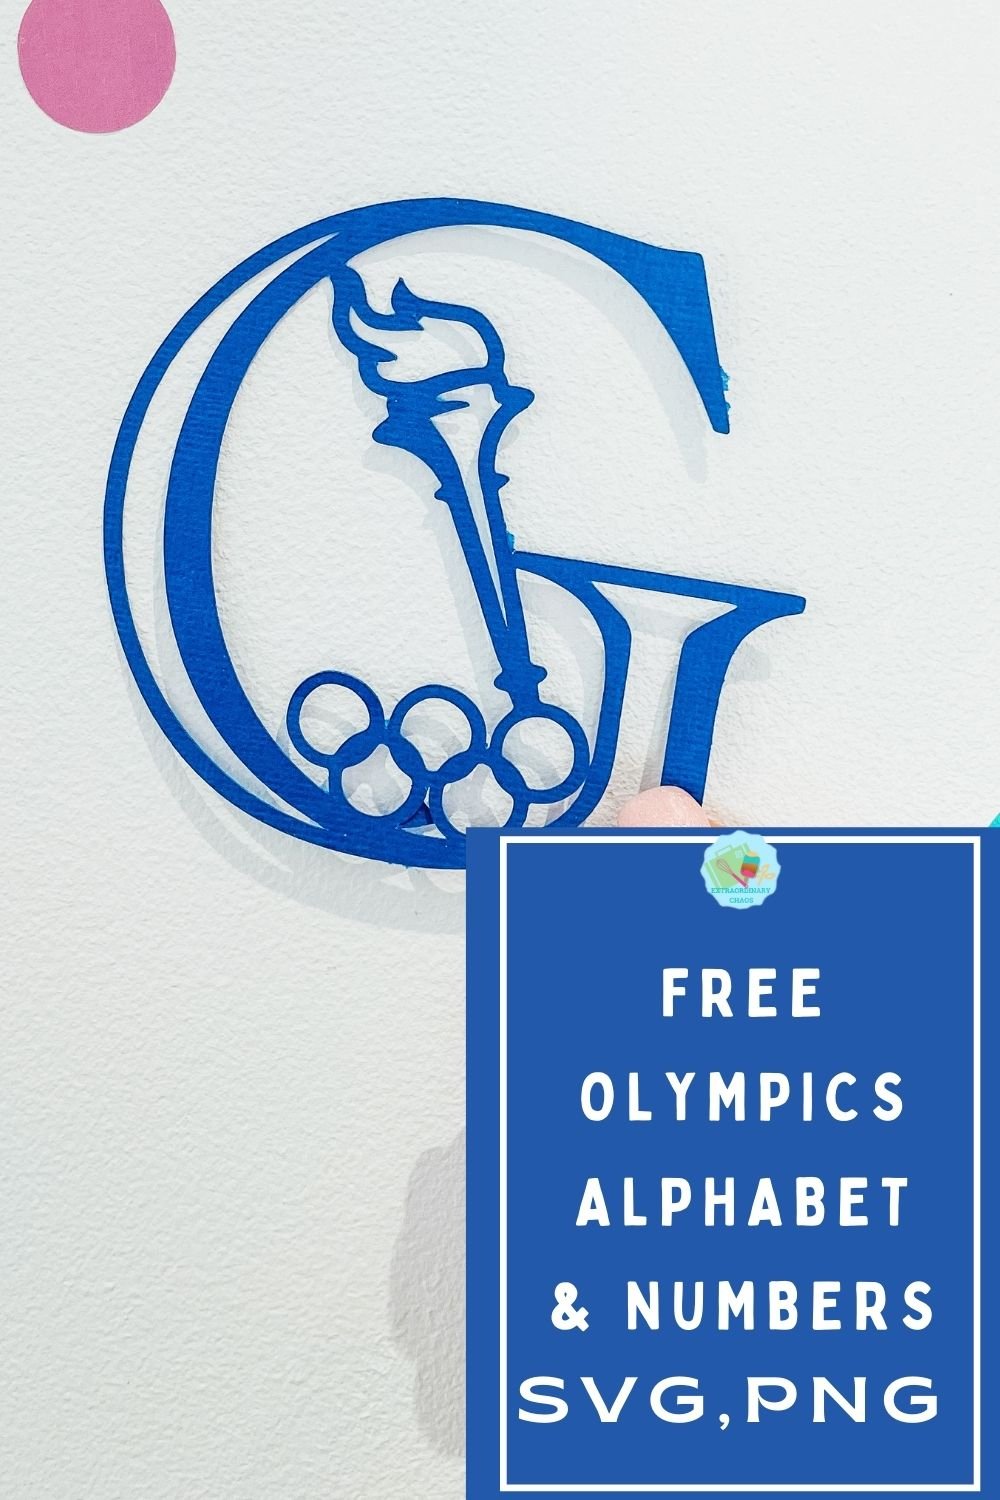 Free Olympics Alphabet and Numbers in SVG and PNG-2